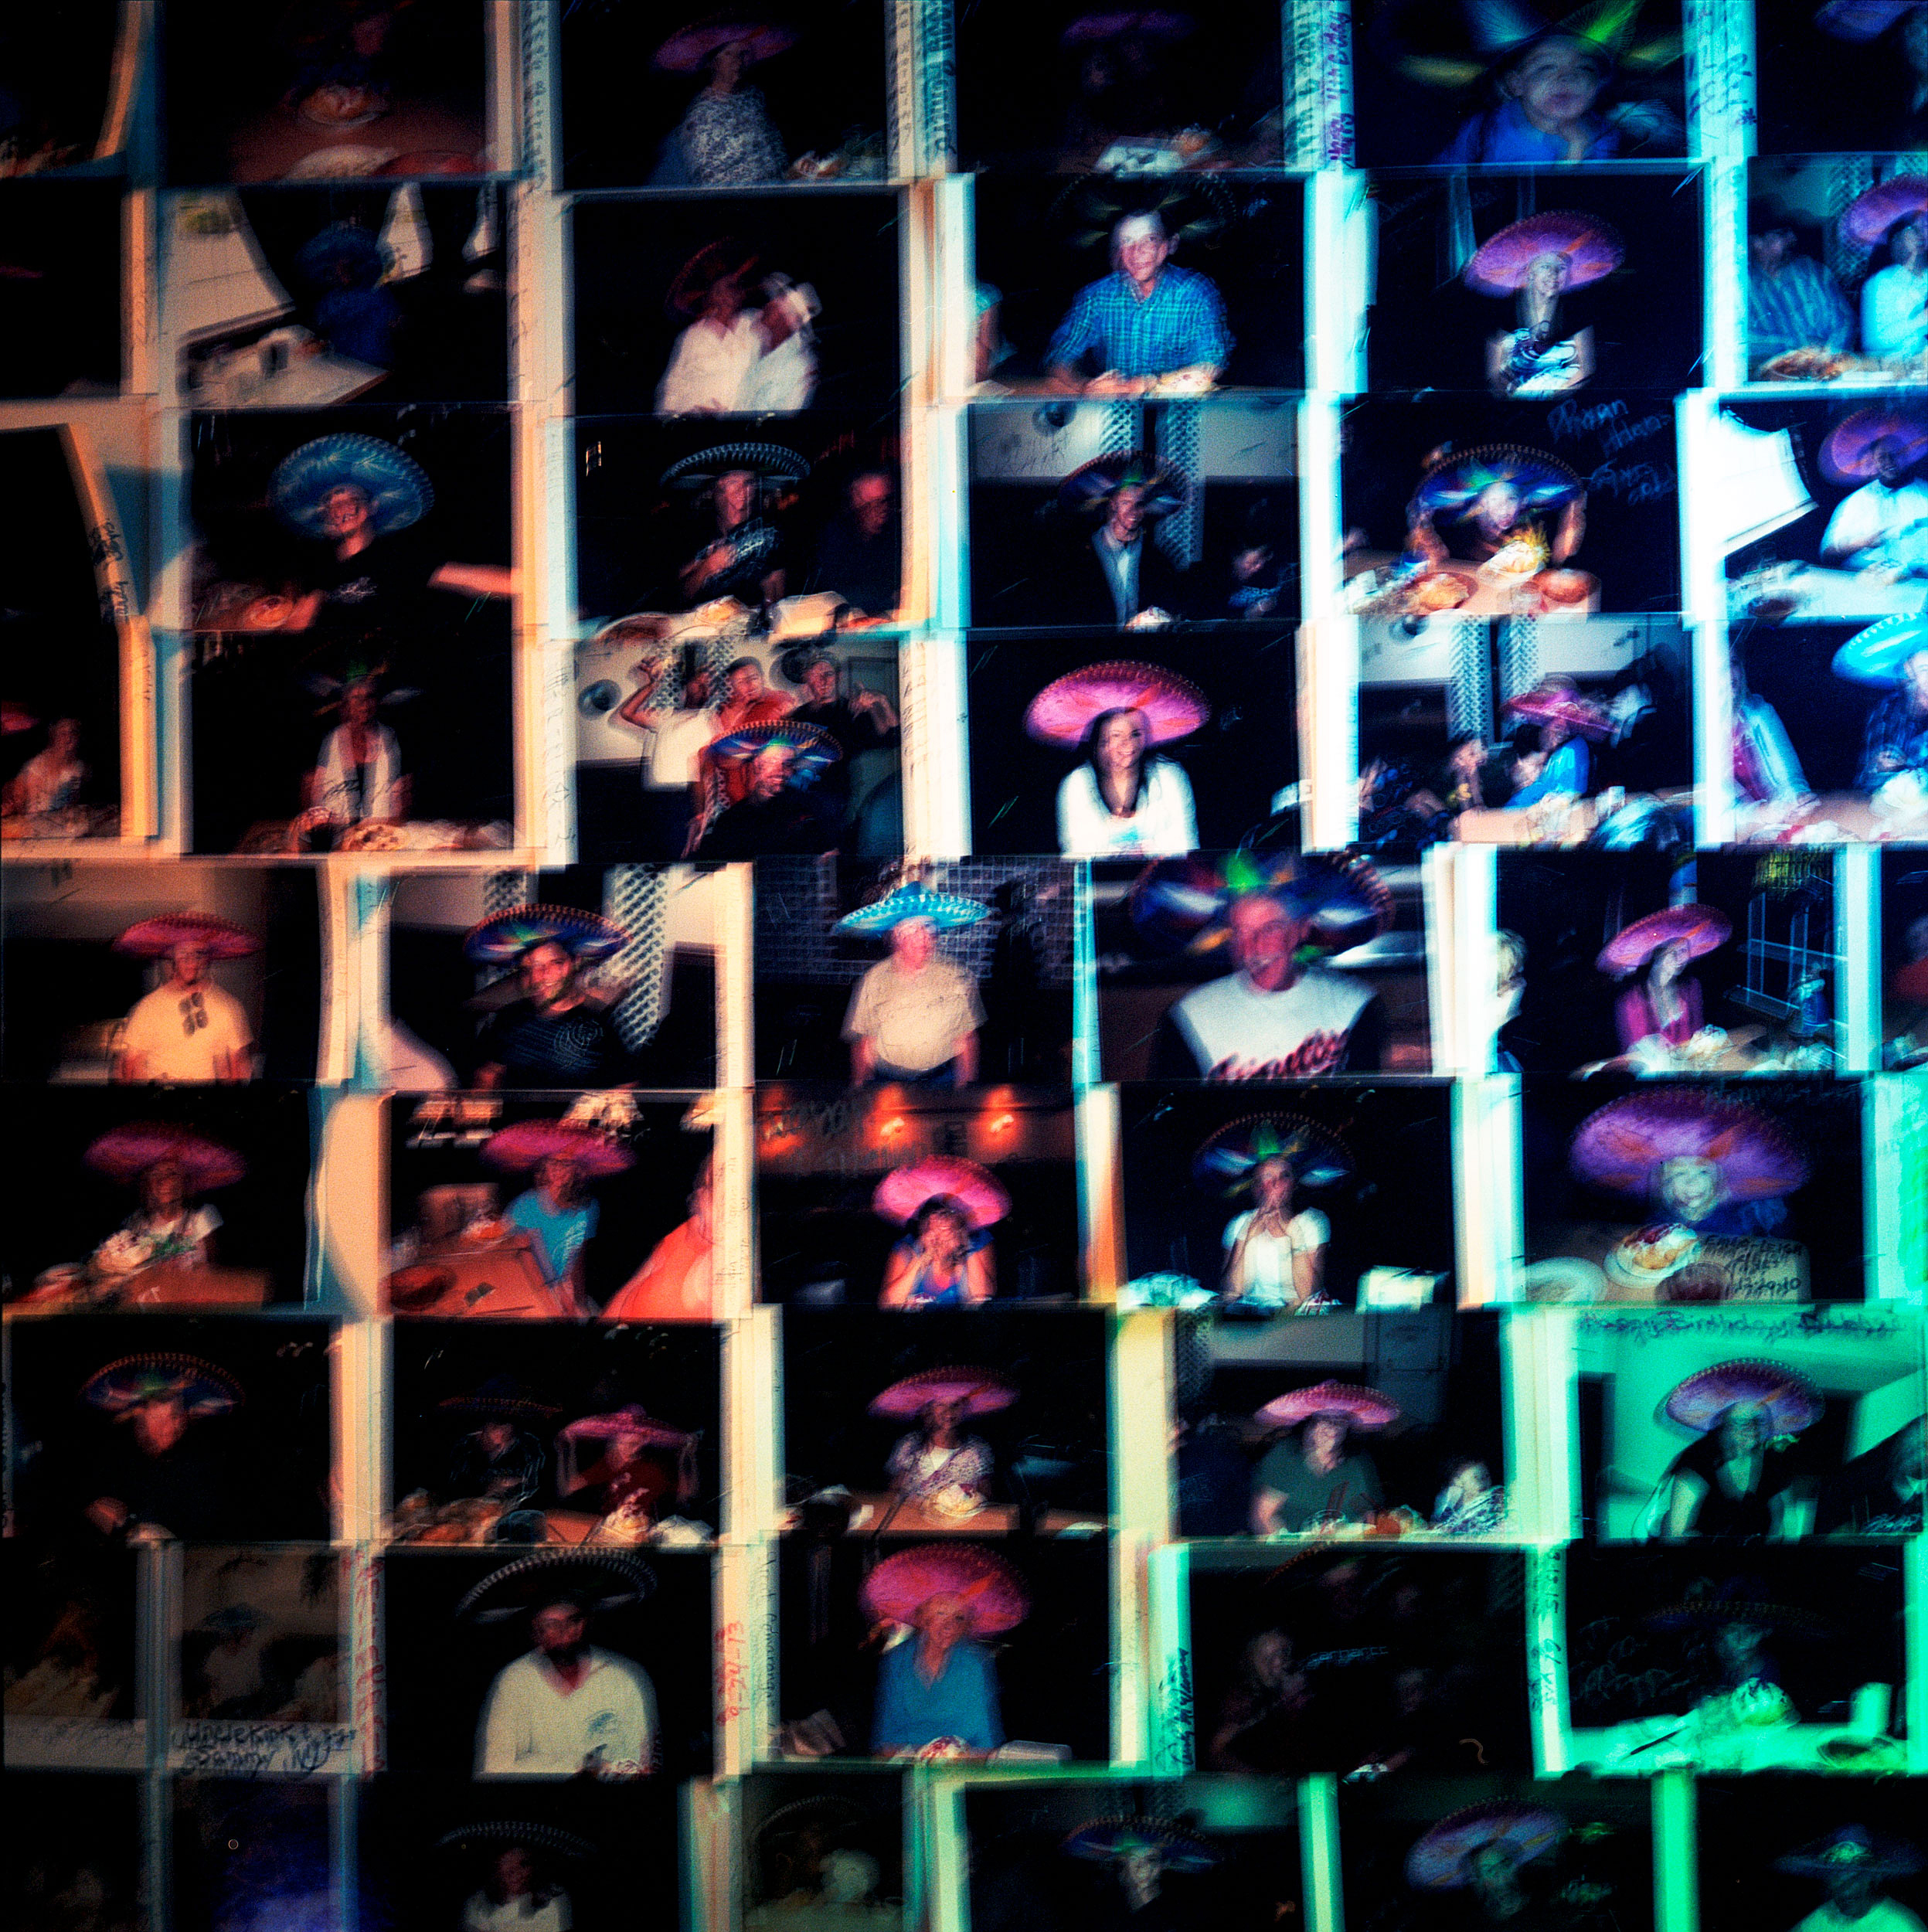  A wall of polaroids at La Fiesta restaurant in Ely, Nevada made on a dinner break on a cross country trip from California to Maryland on US Highway 50. 